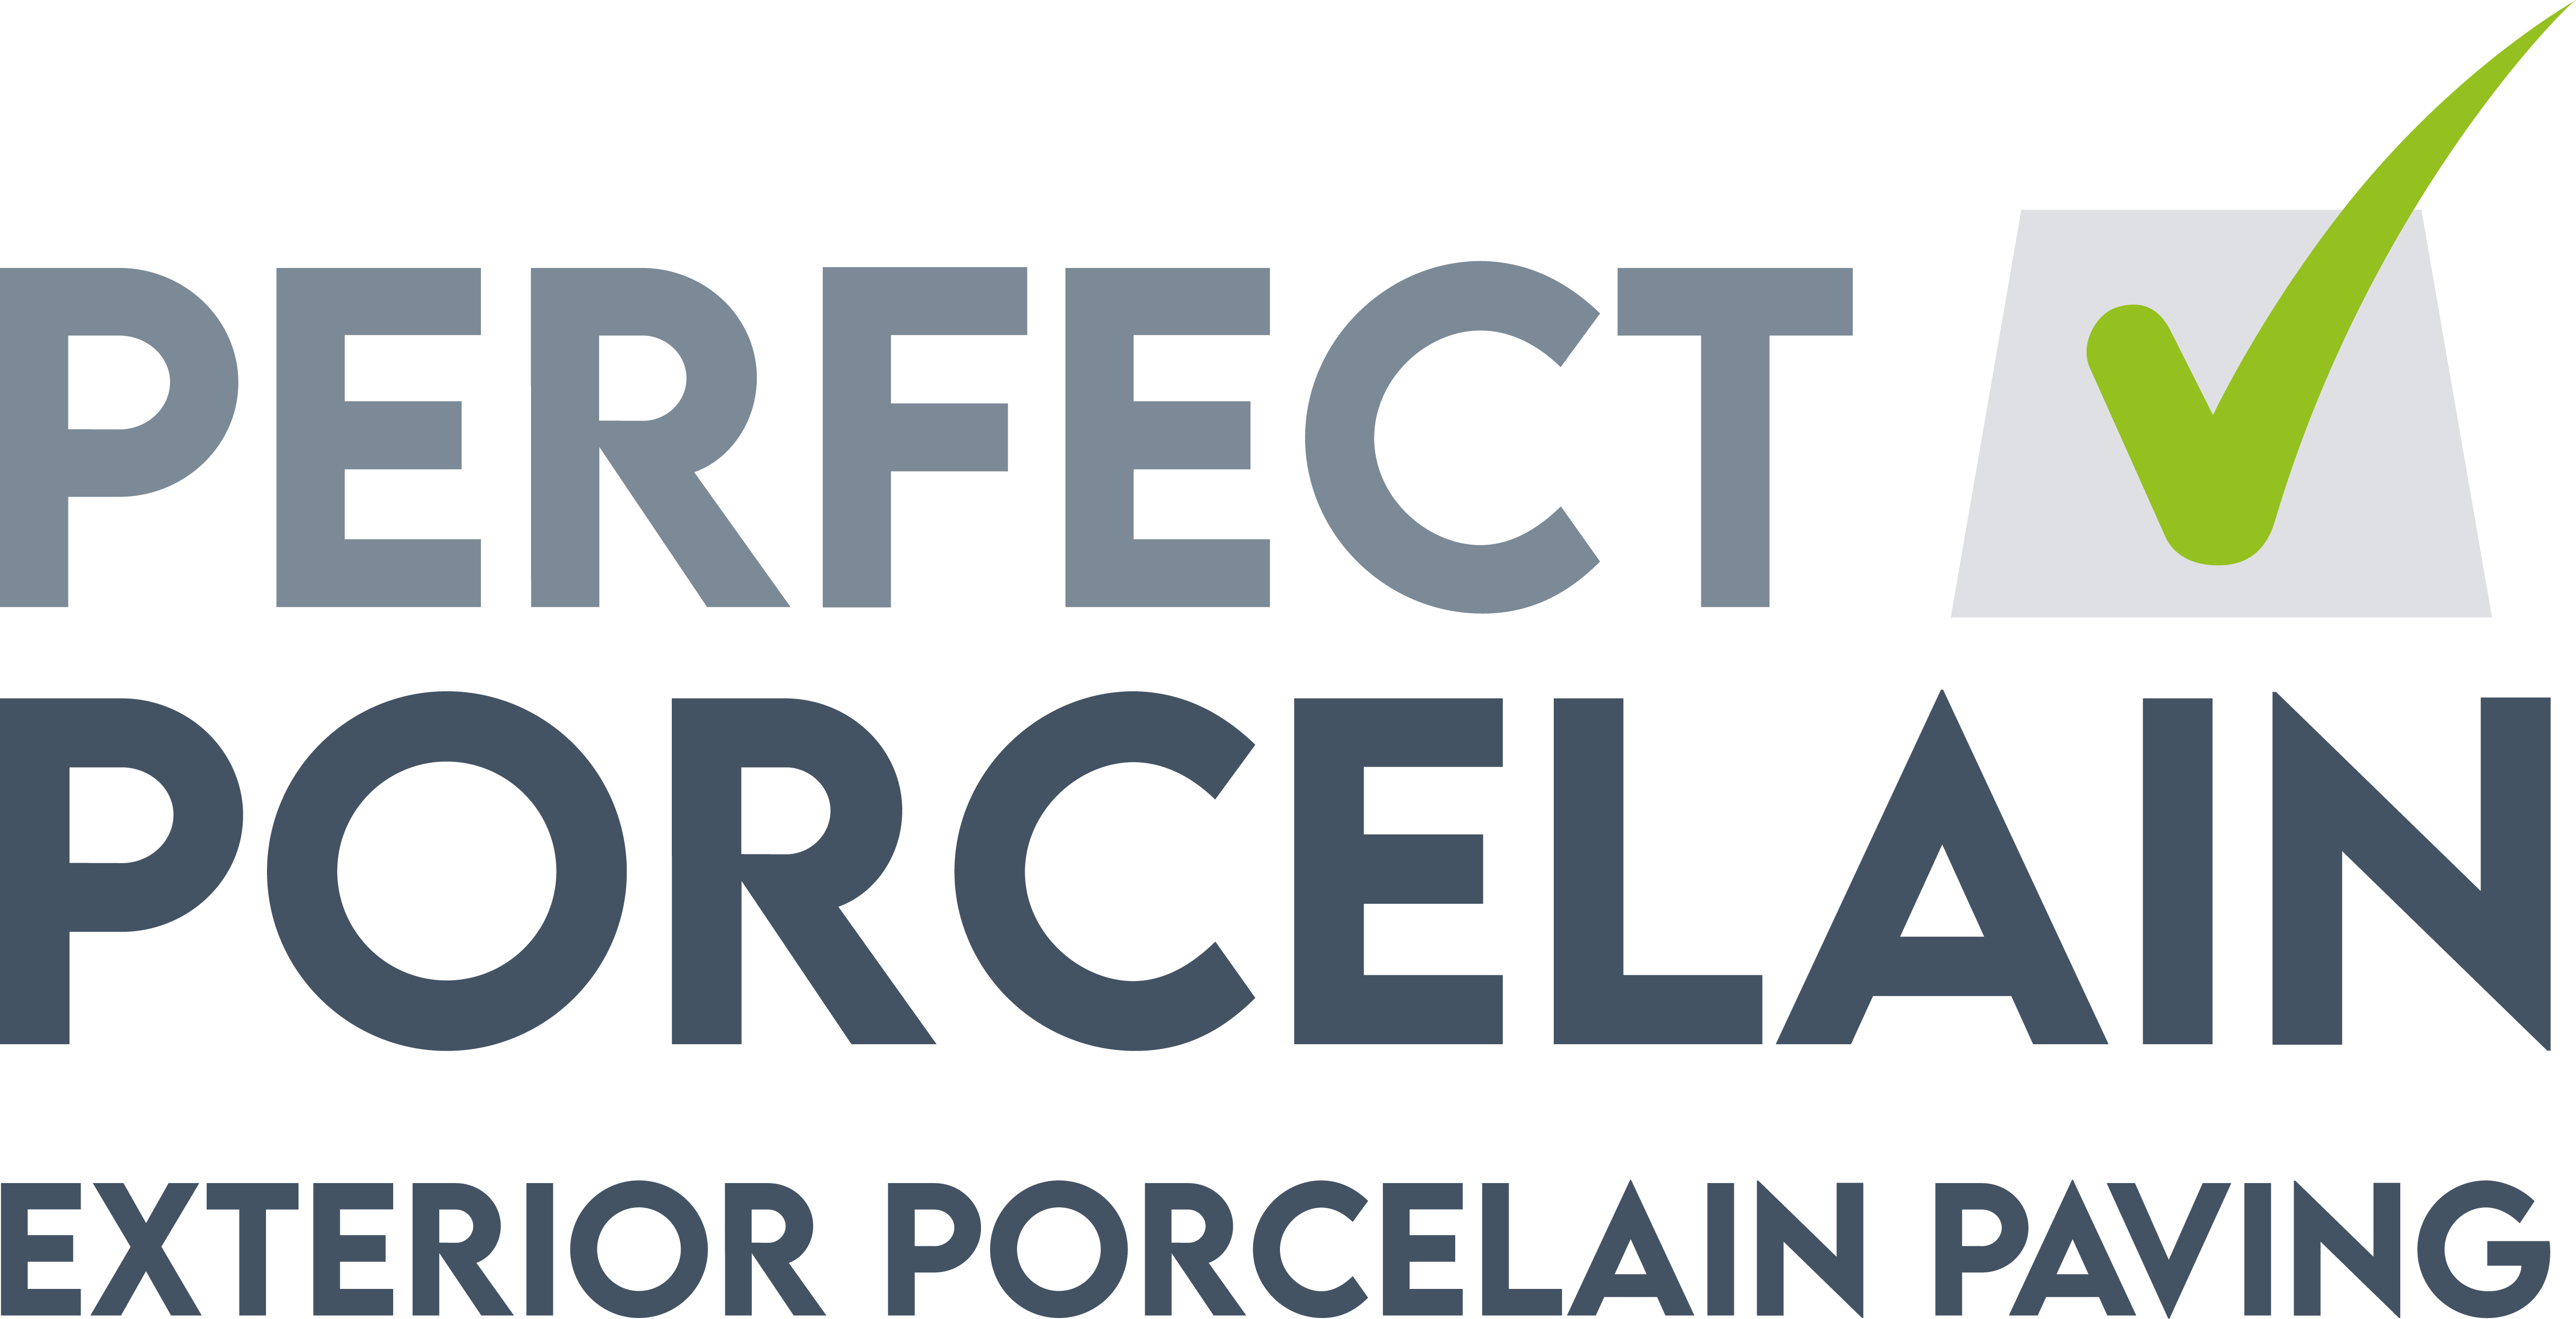 Perfect Porcelain Paving. Suppliers of High Quality Porcelain Paving, Porcelain Accessories And Block Paving